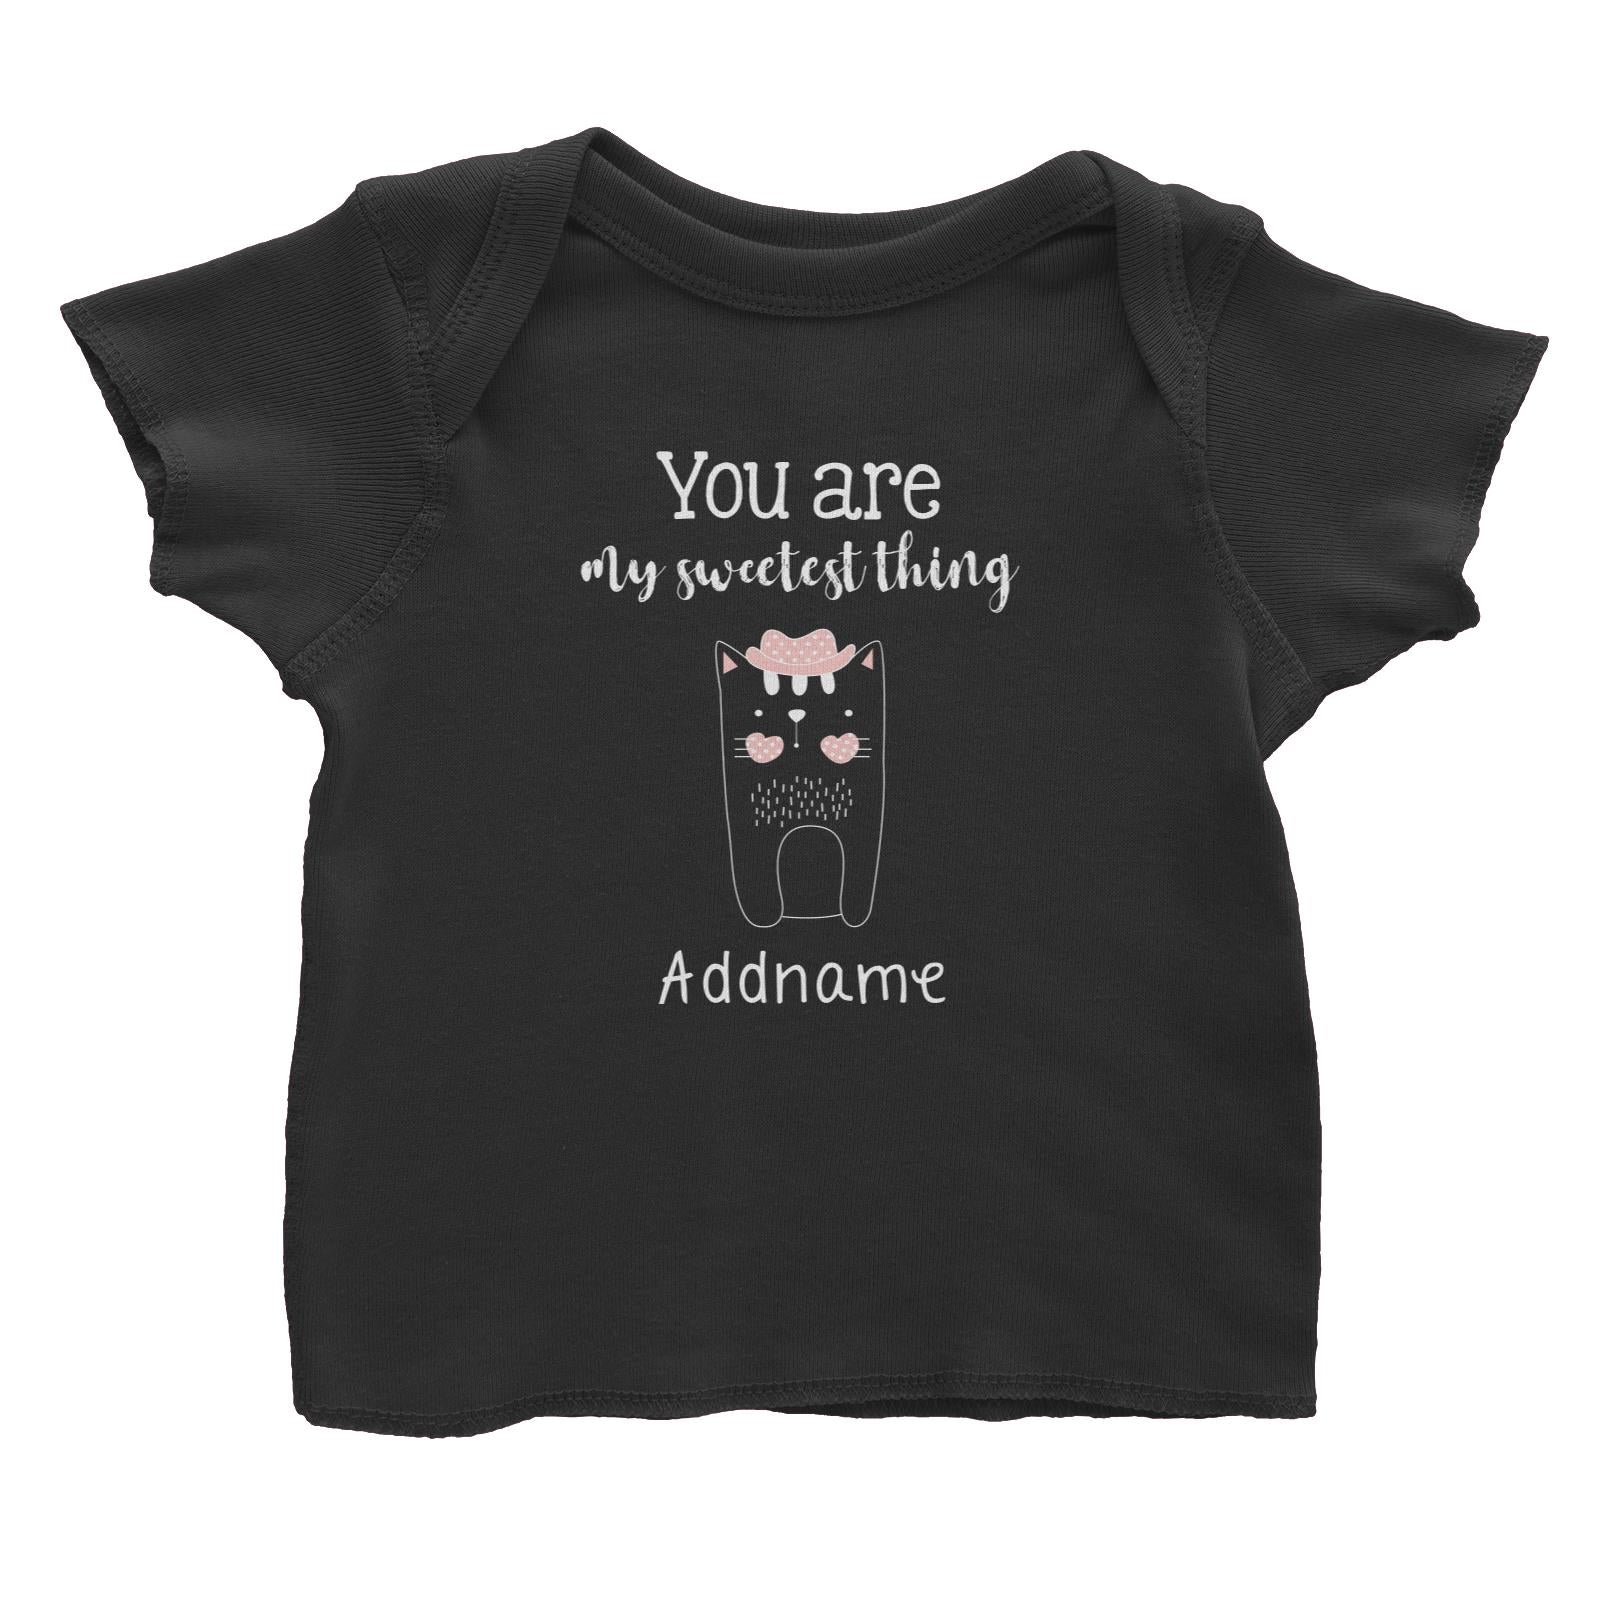 Cute Animals and Friends Series 2 Cat You Are My Sweetest Things Addname Baby T-Shirt